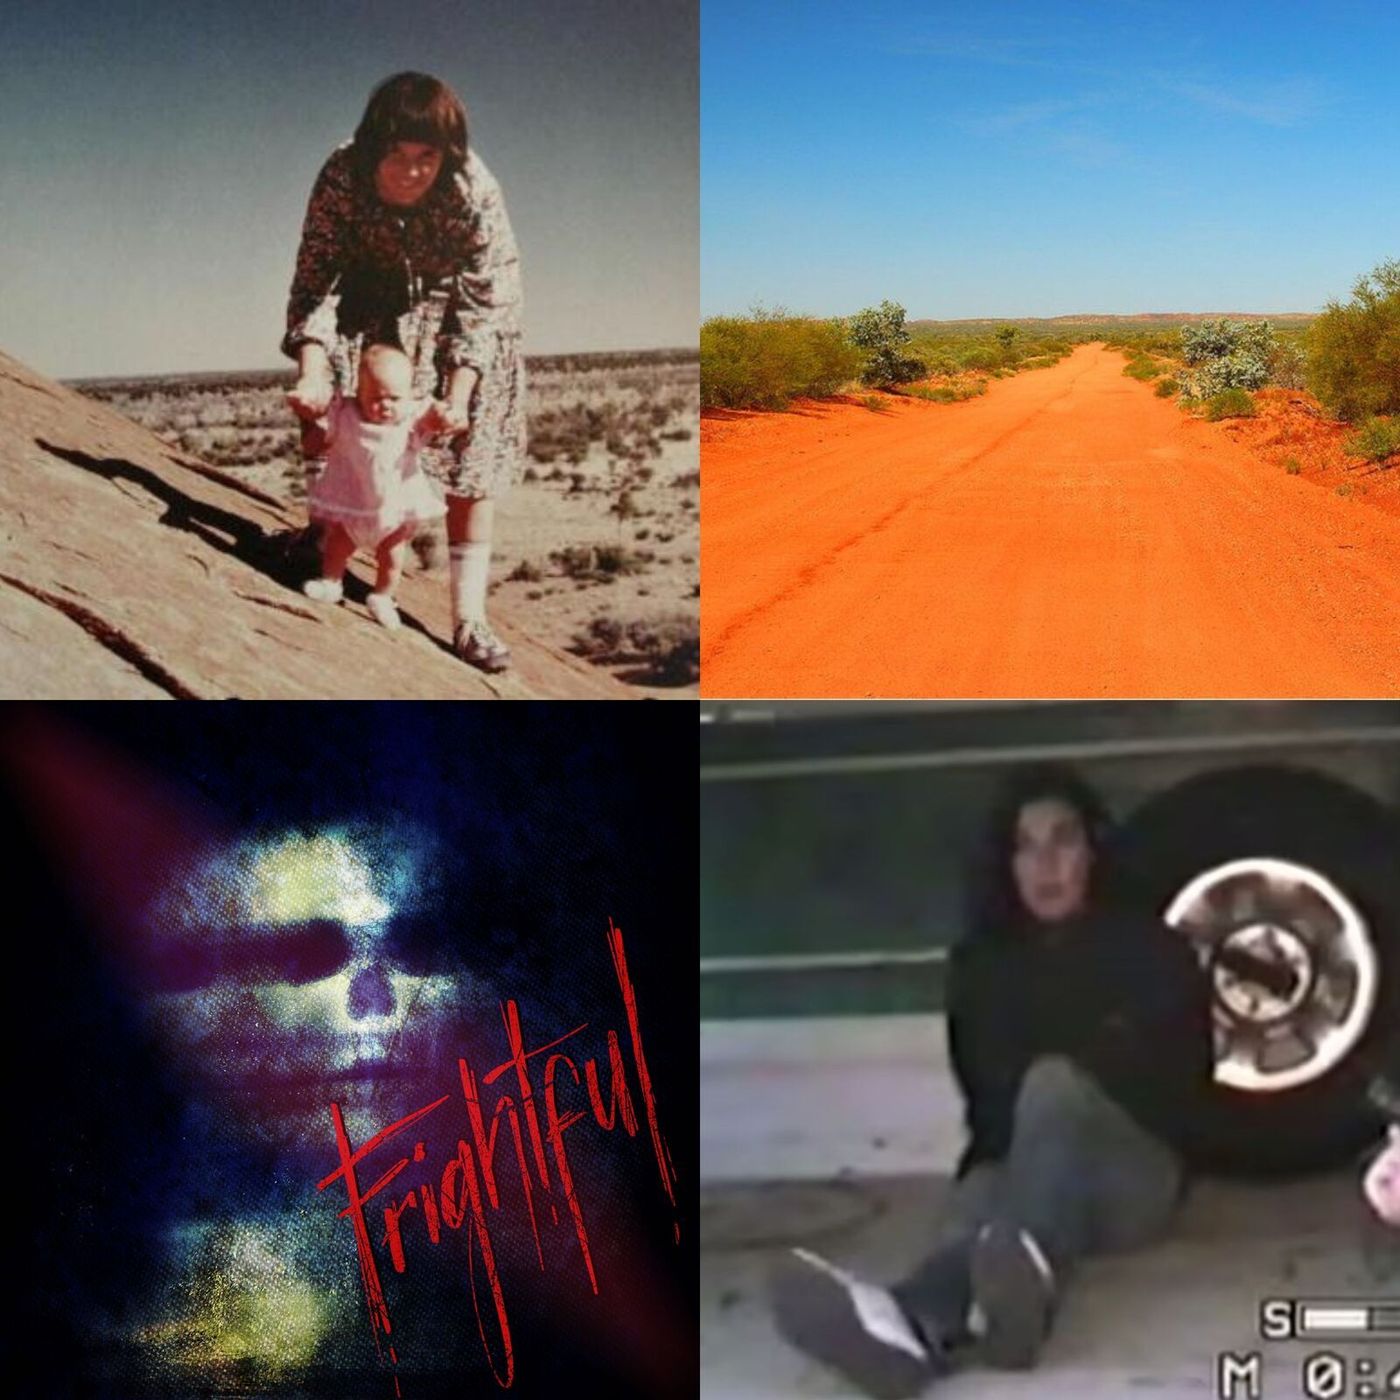 46: Scary True Stories of the Australian Outback (Part 1 - Human Horrors)